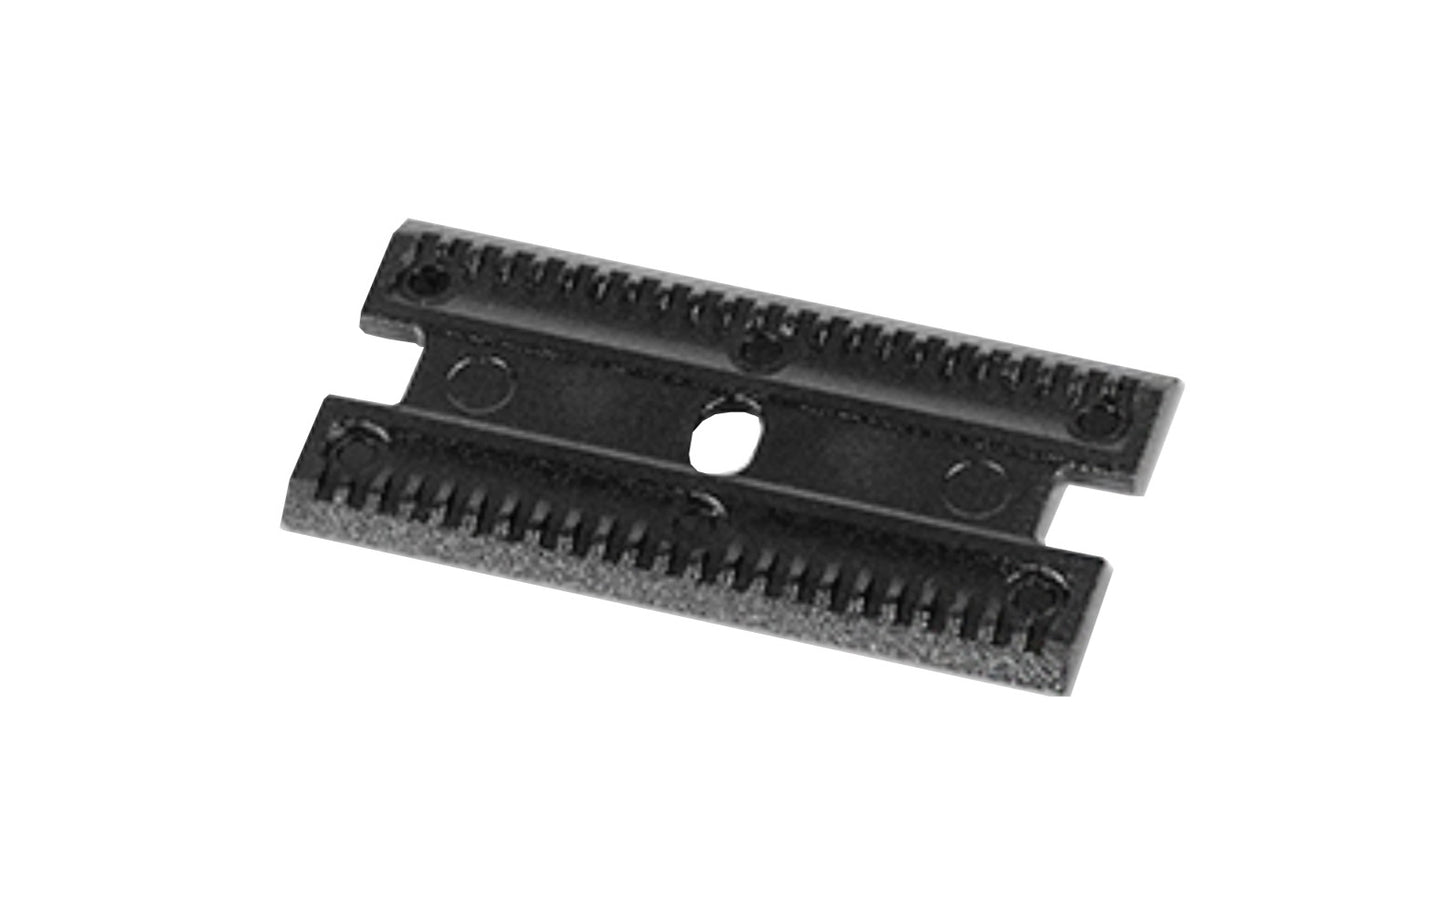 Titan Tools Non-Marring Scraper Blades. Made of Polymere material. Great for scraping on delicate surfaces, etc. Will fit standard razor blade holders. 21 blades in pack. Model 12038. 802090120381